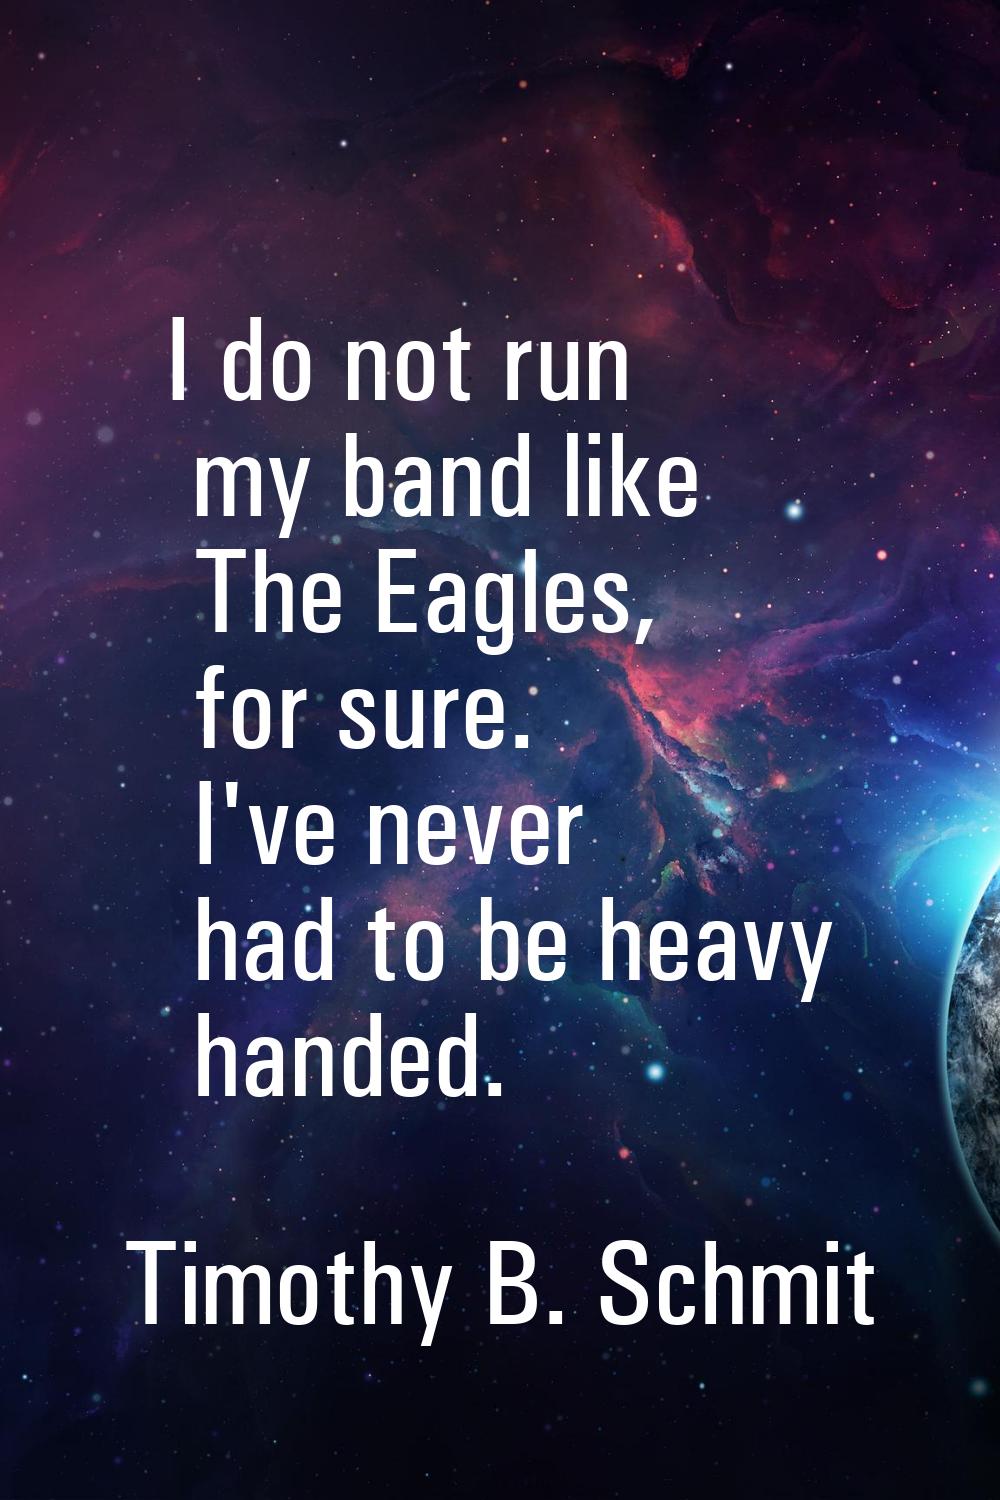 I do not run my band like The Eagles, for sure. I've never had to be heavy handed.